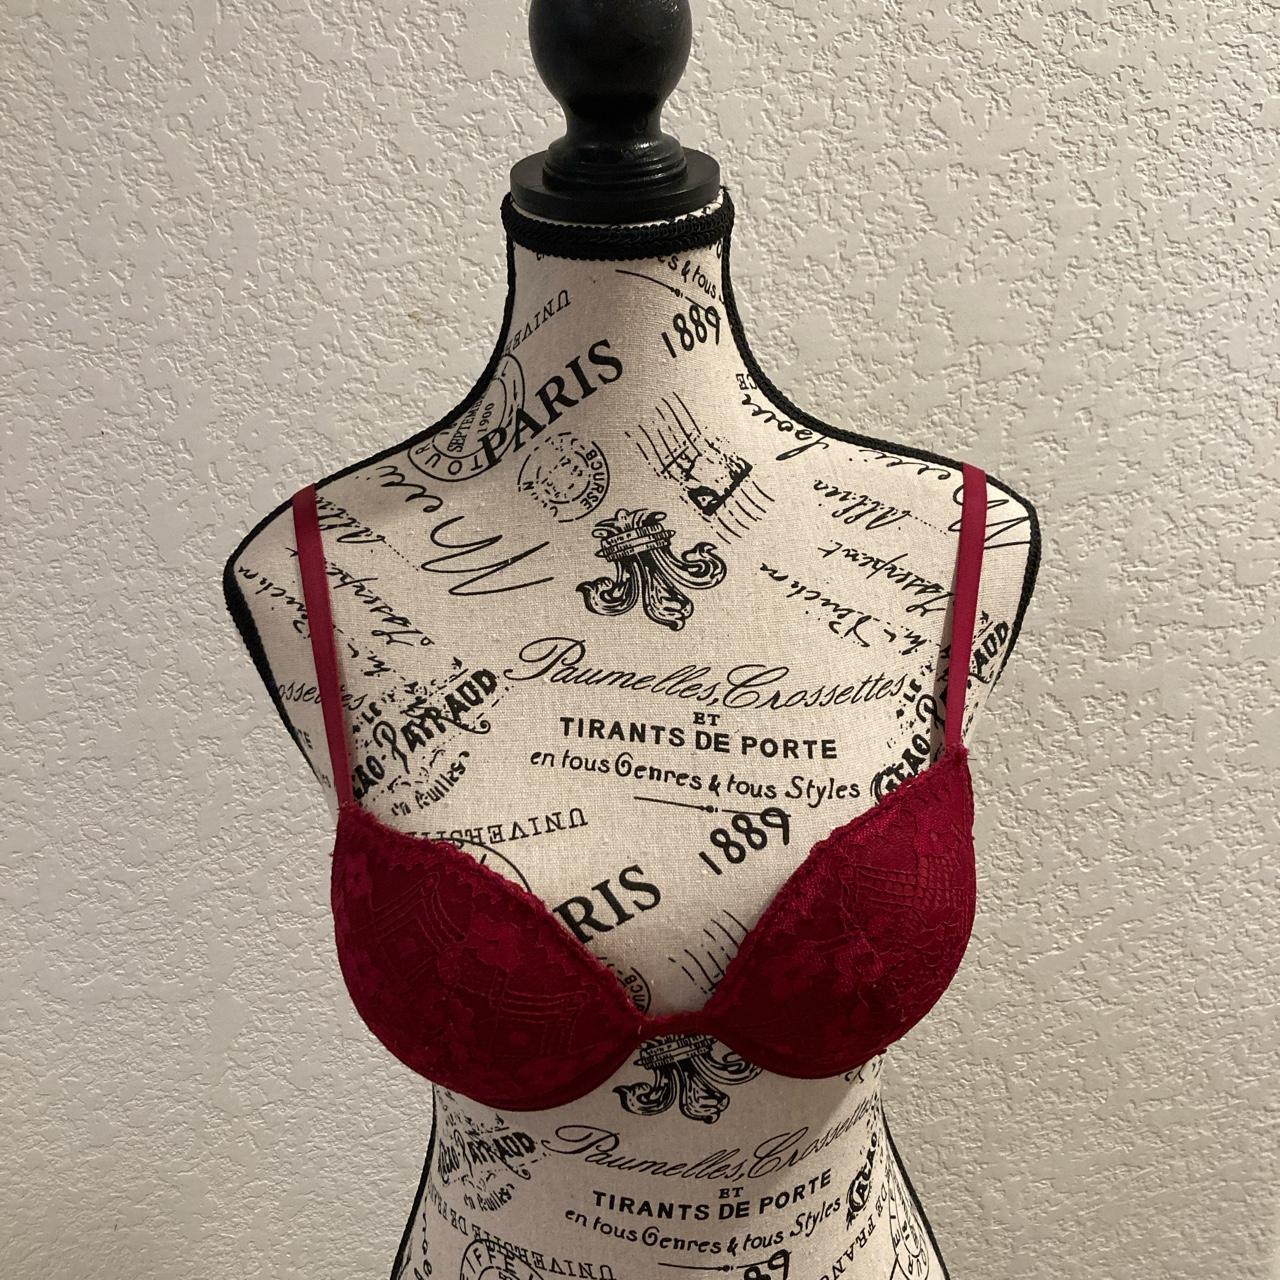 Auden Push Up Wire Free Bra Comfortable and soft - Depop